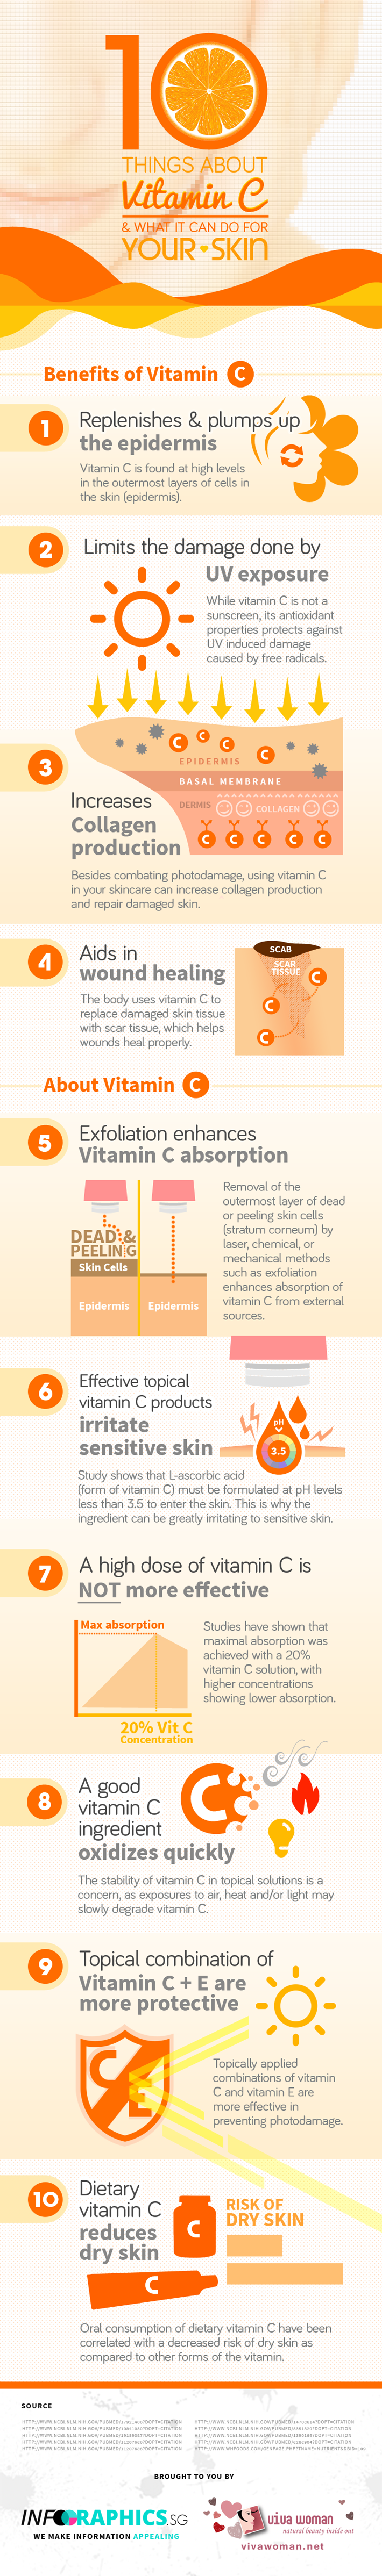 Vitamin C And Its 10 Unique Benefits For Your Skin Infographic